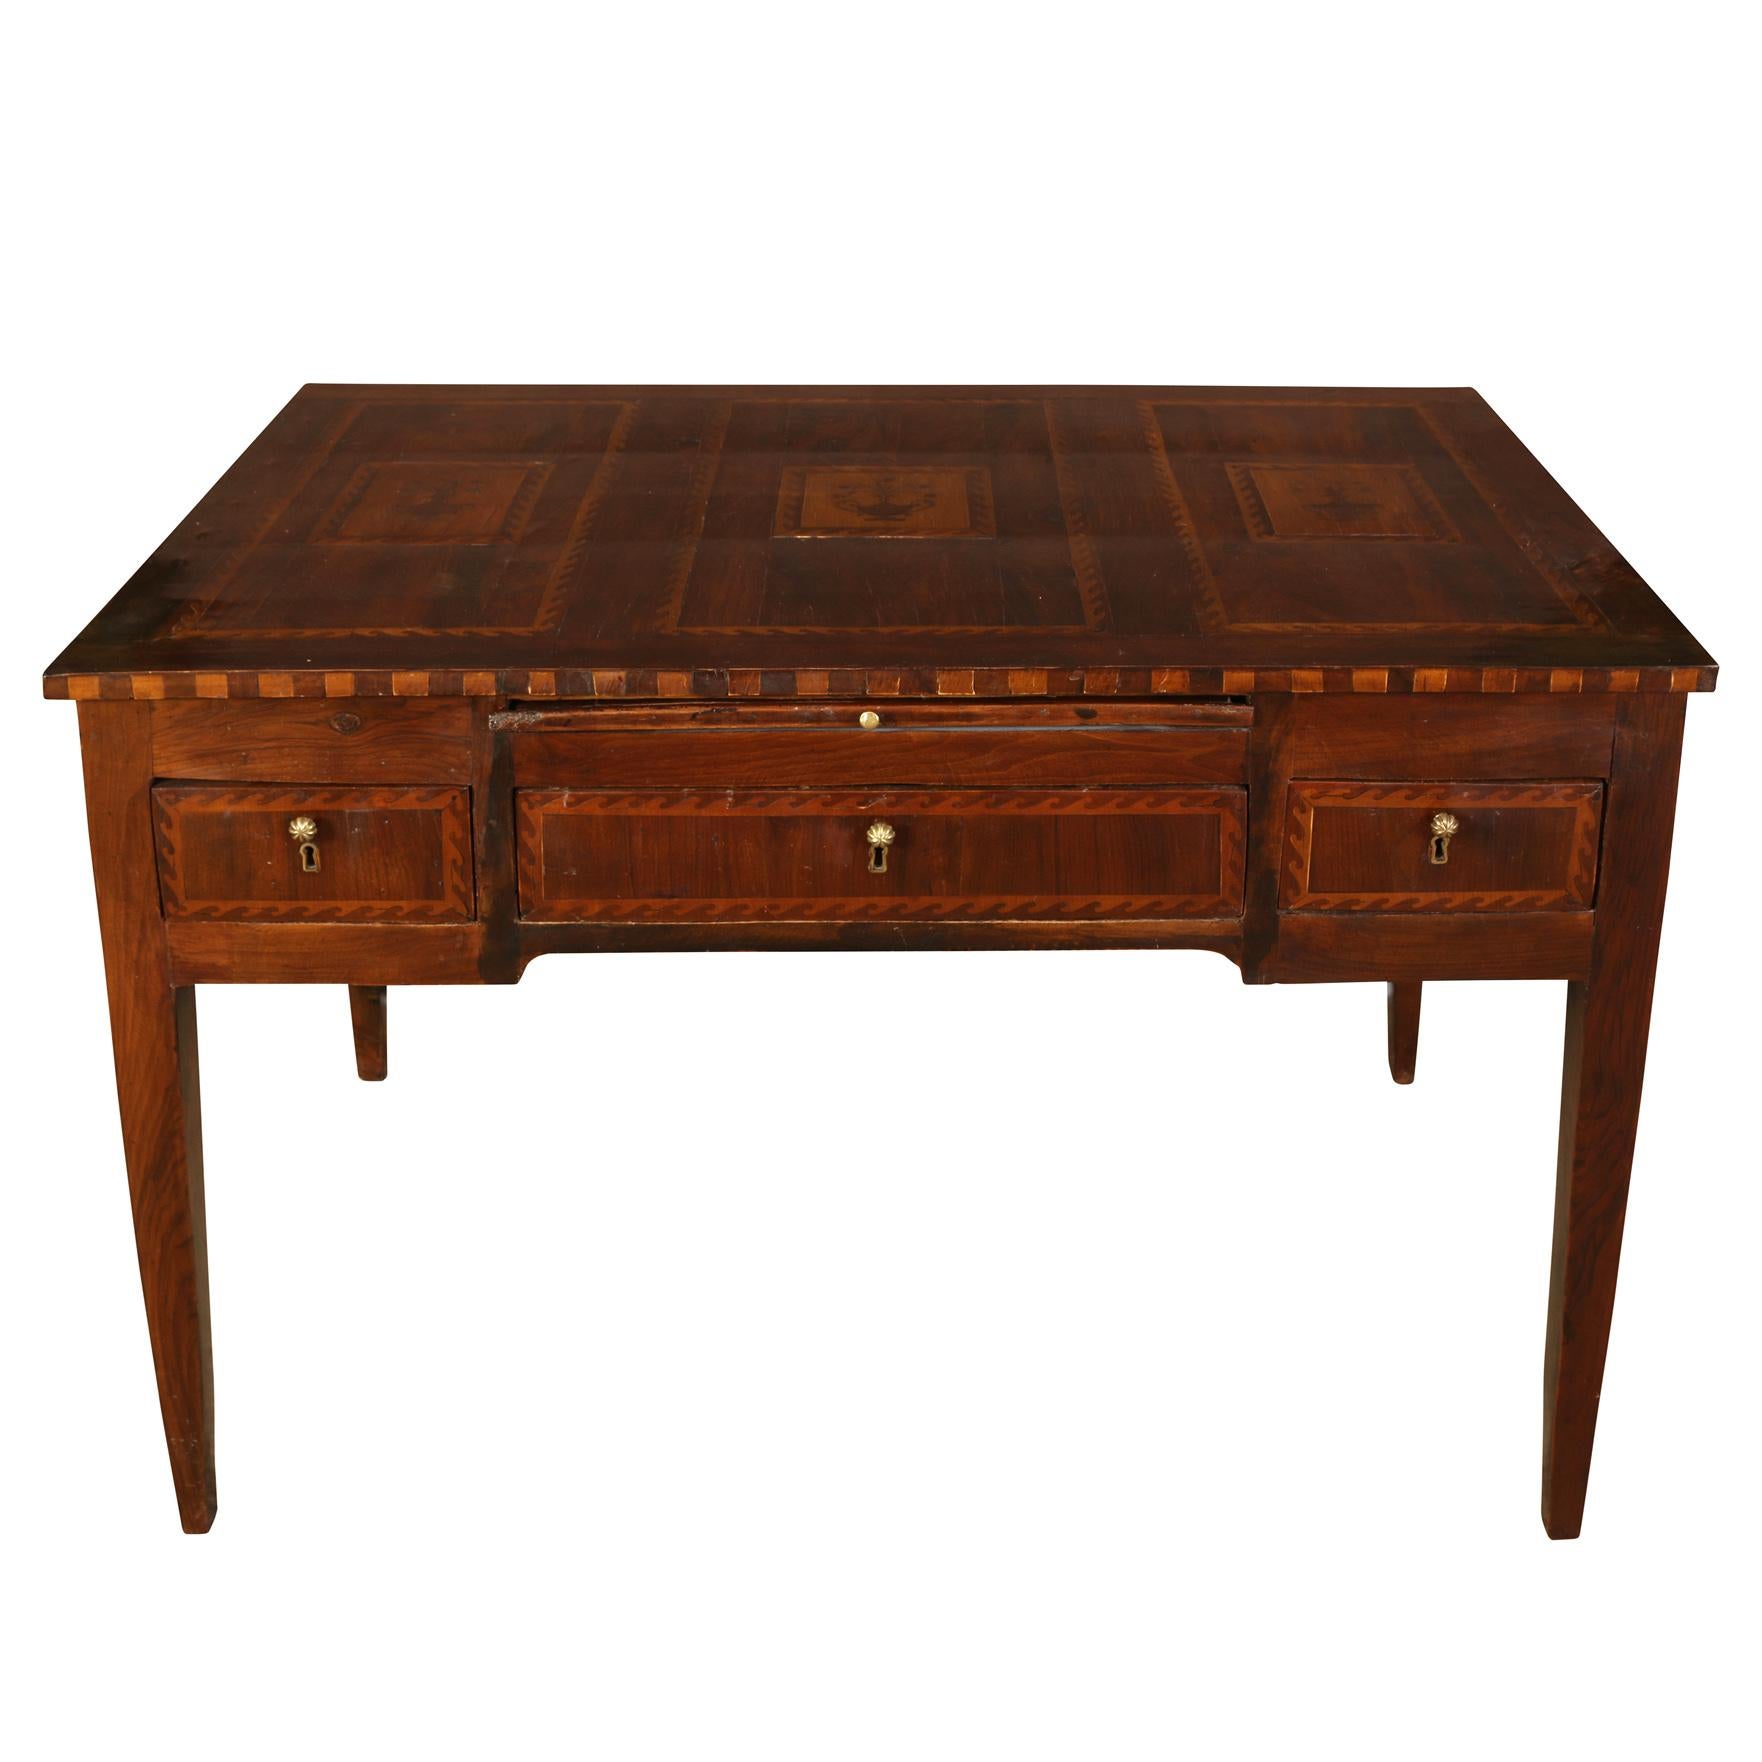 An exceptionally beautiful Italian writing table with three drawers and a leather top pull-out writing surface.  The desk is constructed in a walnut, with a lighter secondary wood.  Beautifully crafted, the desk features exquisite neoclassical motif